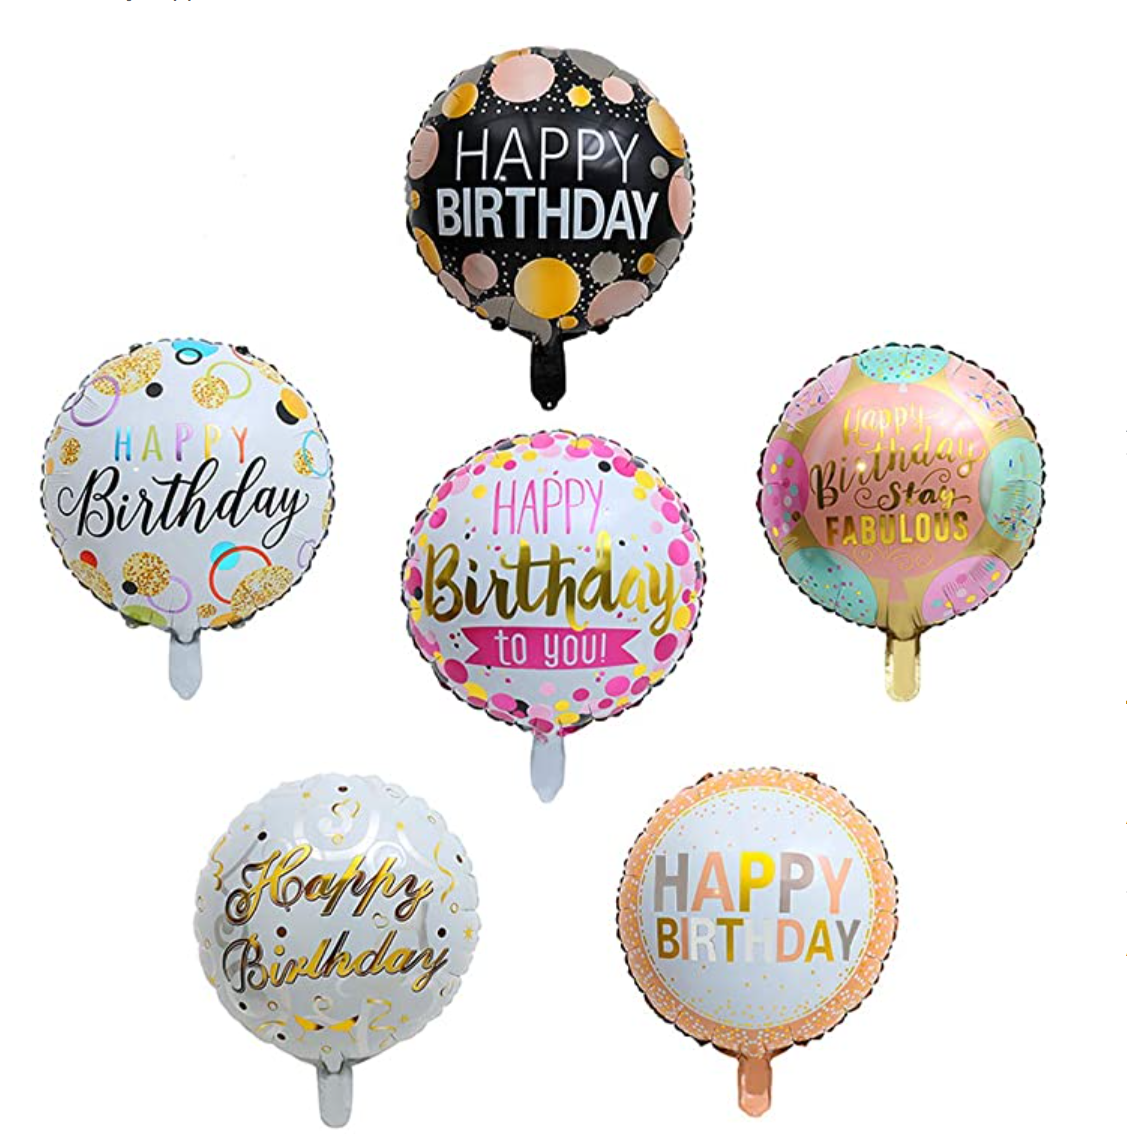 Foil Greeting Balloons!